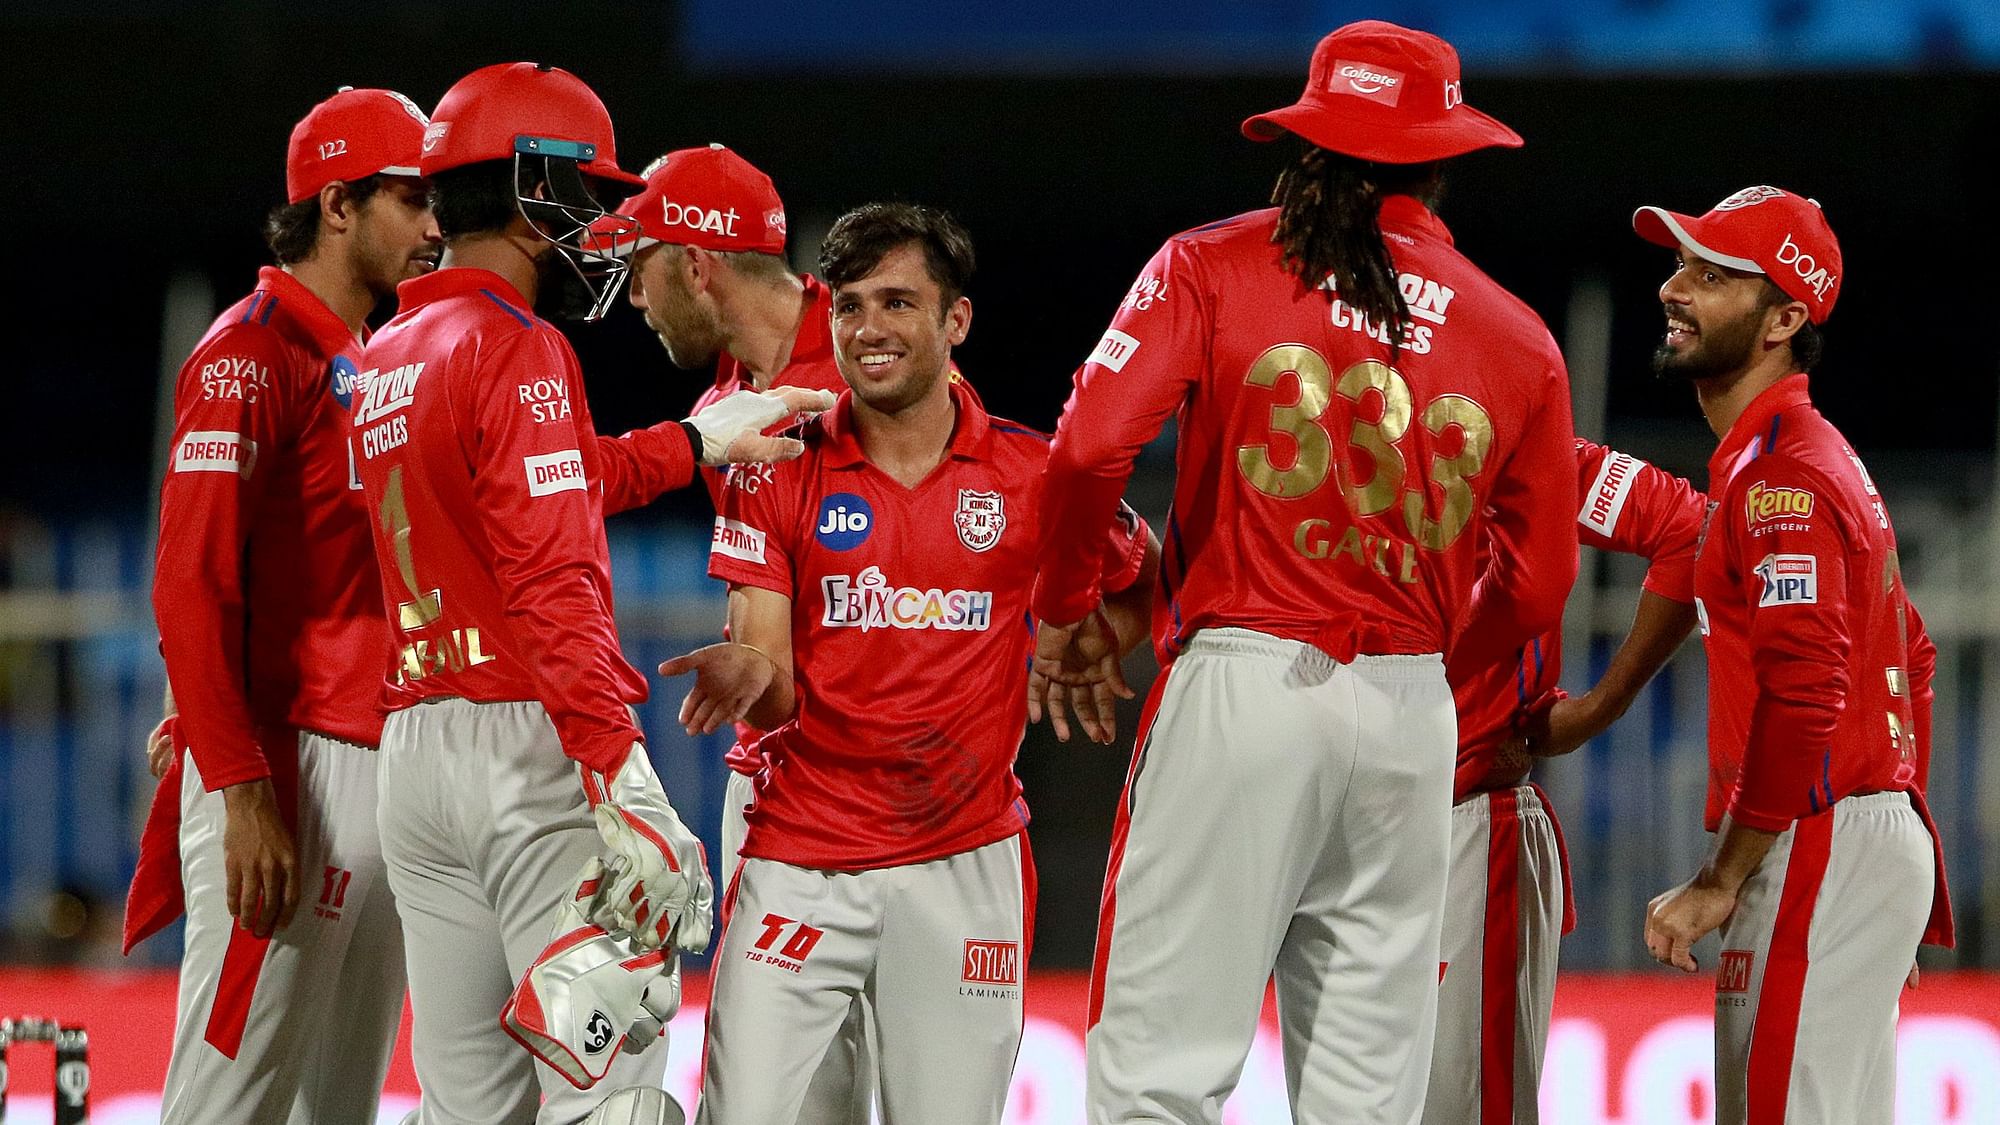 KXIP defeat KKR by 8 wickets in the 46th game of the IPL.